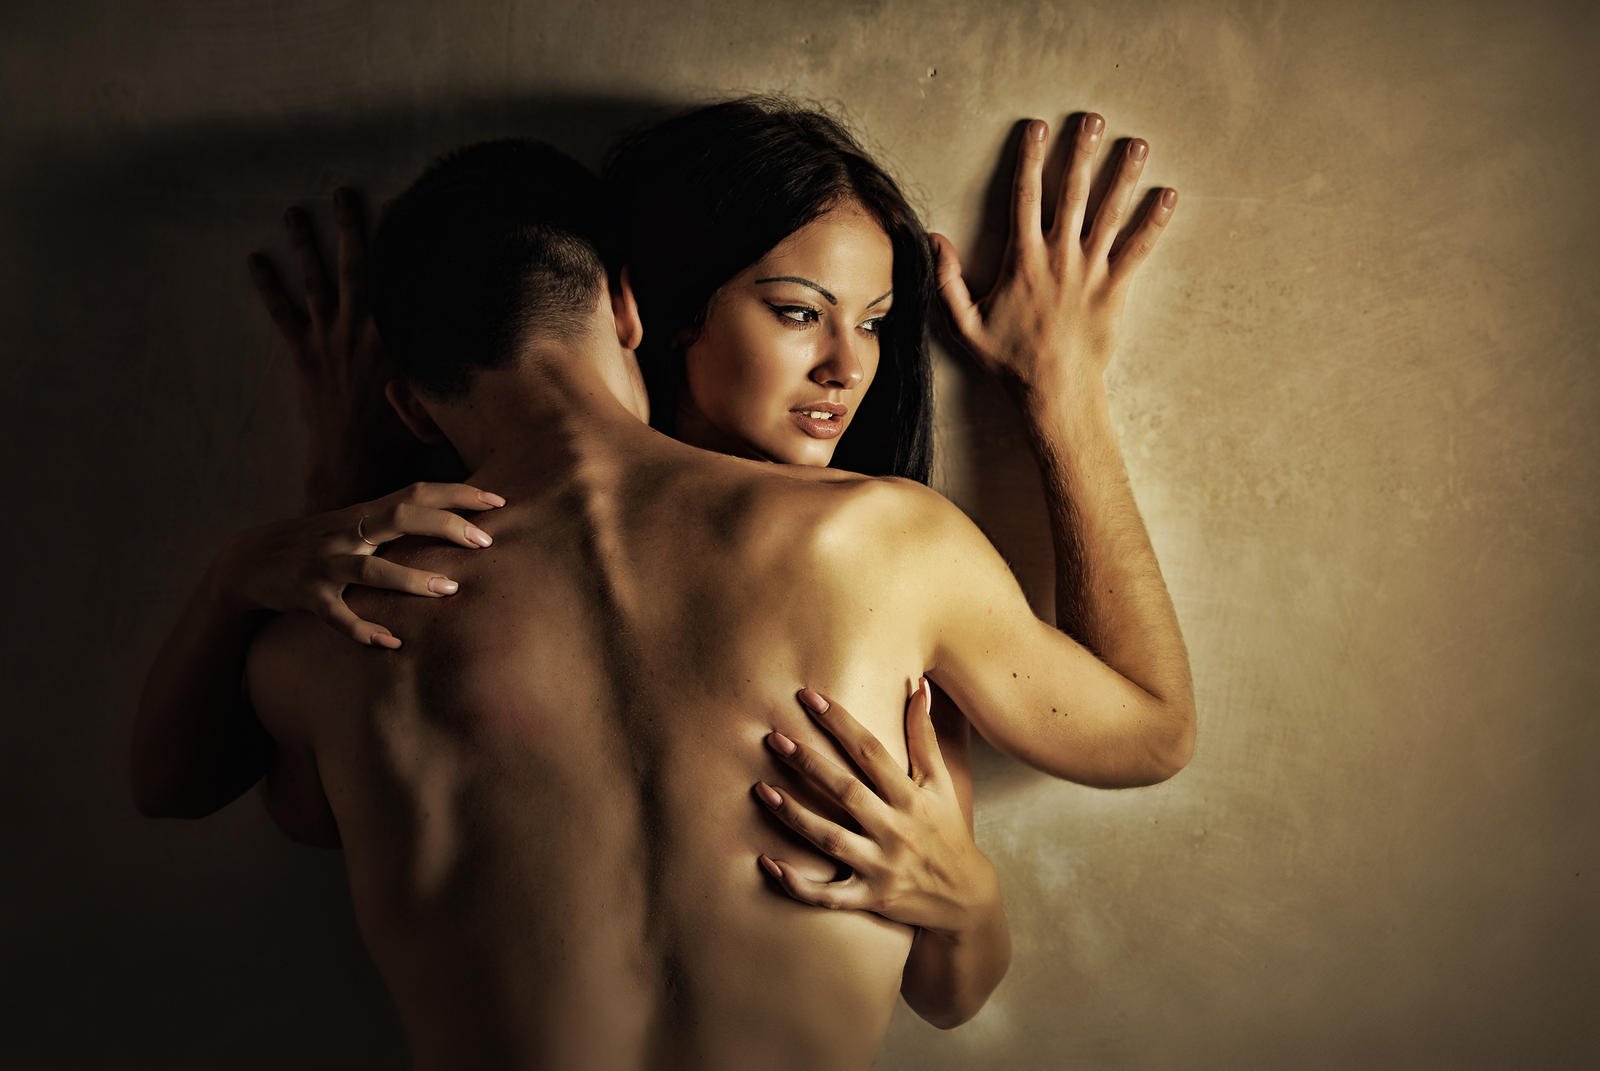 Strange Sex Fetishes - 15 Sexual Fetishes That Are Way More Common Than You'd Imagine